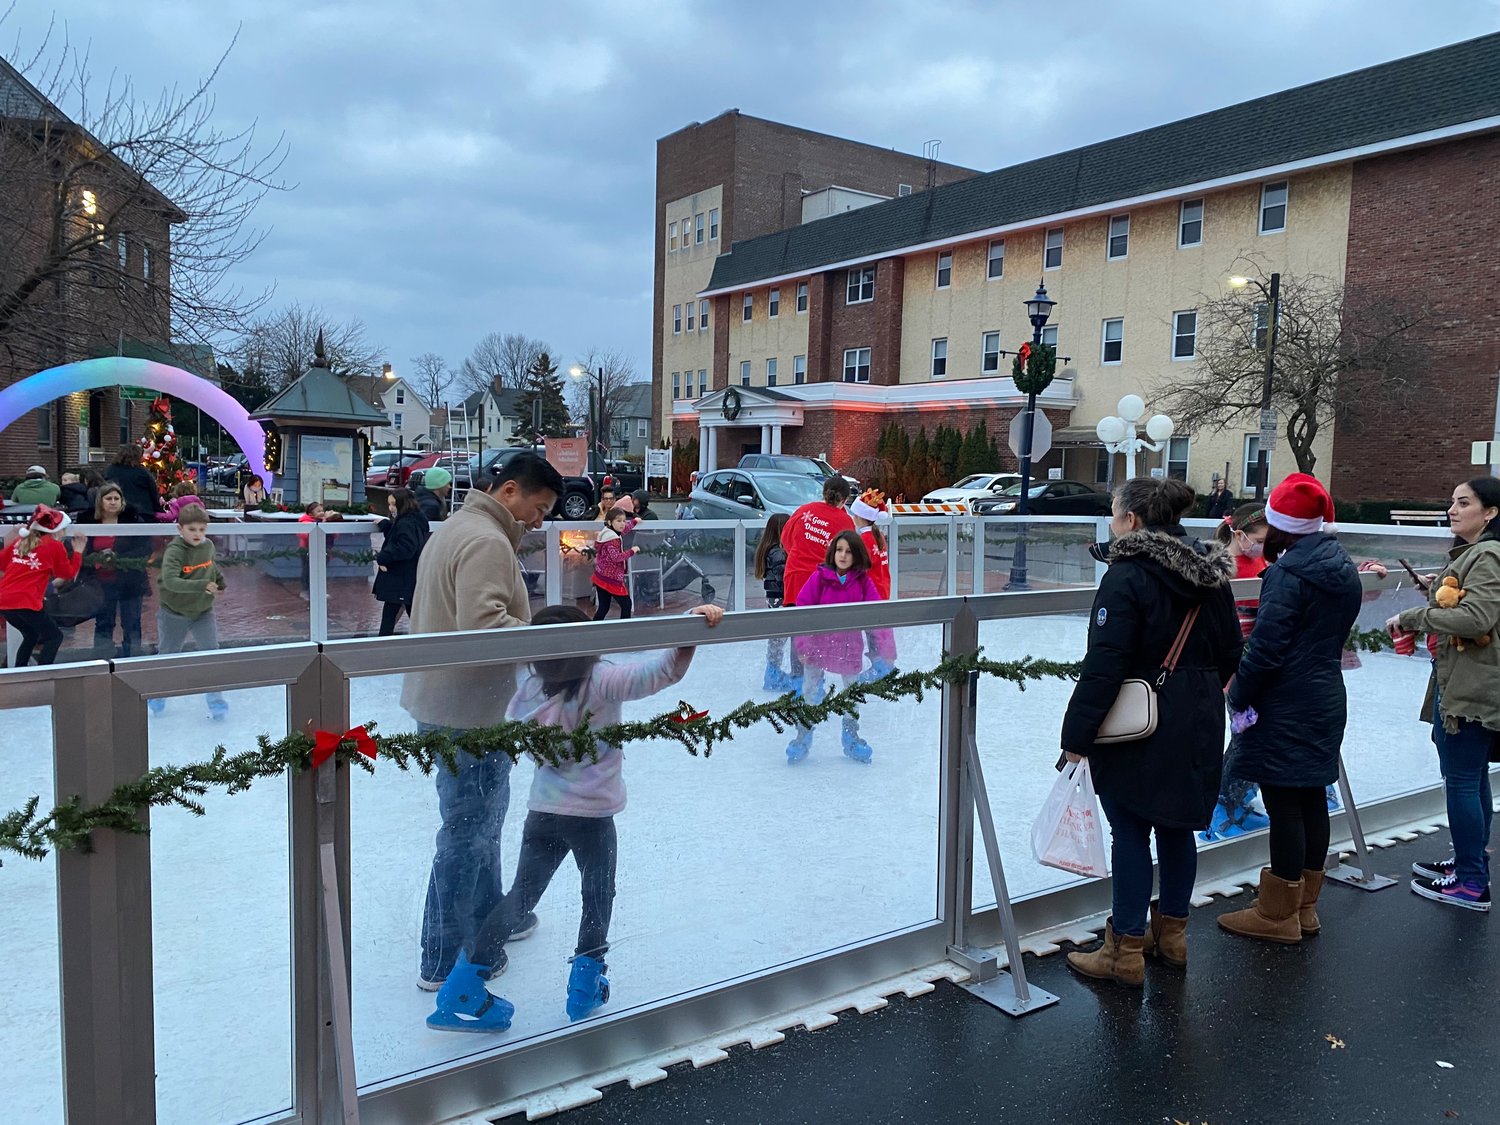 The skating rink was a big hit at Oyster Bay’s sixth annual Holiday Market and Tree Lighting.